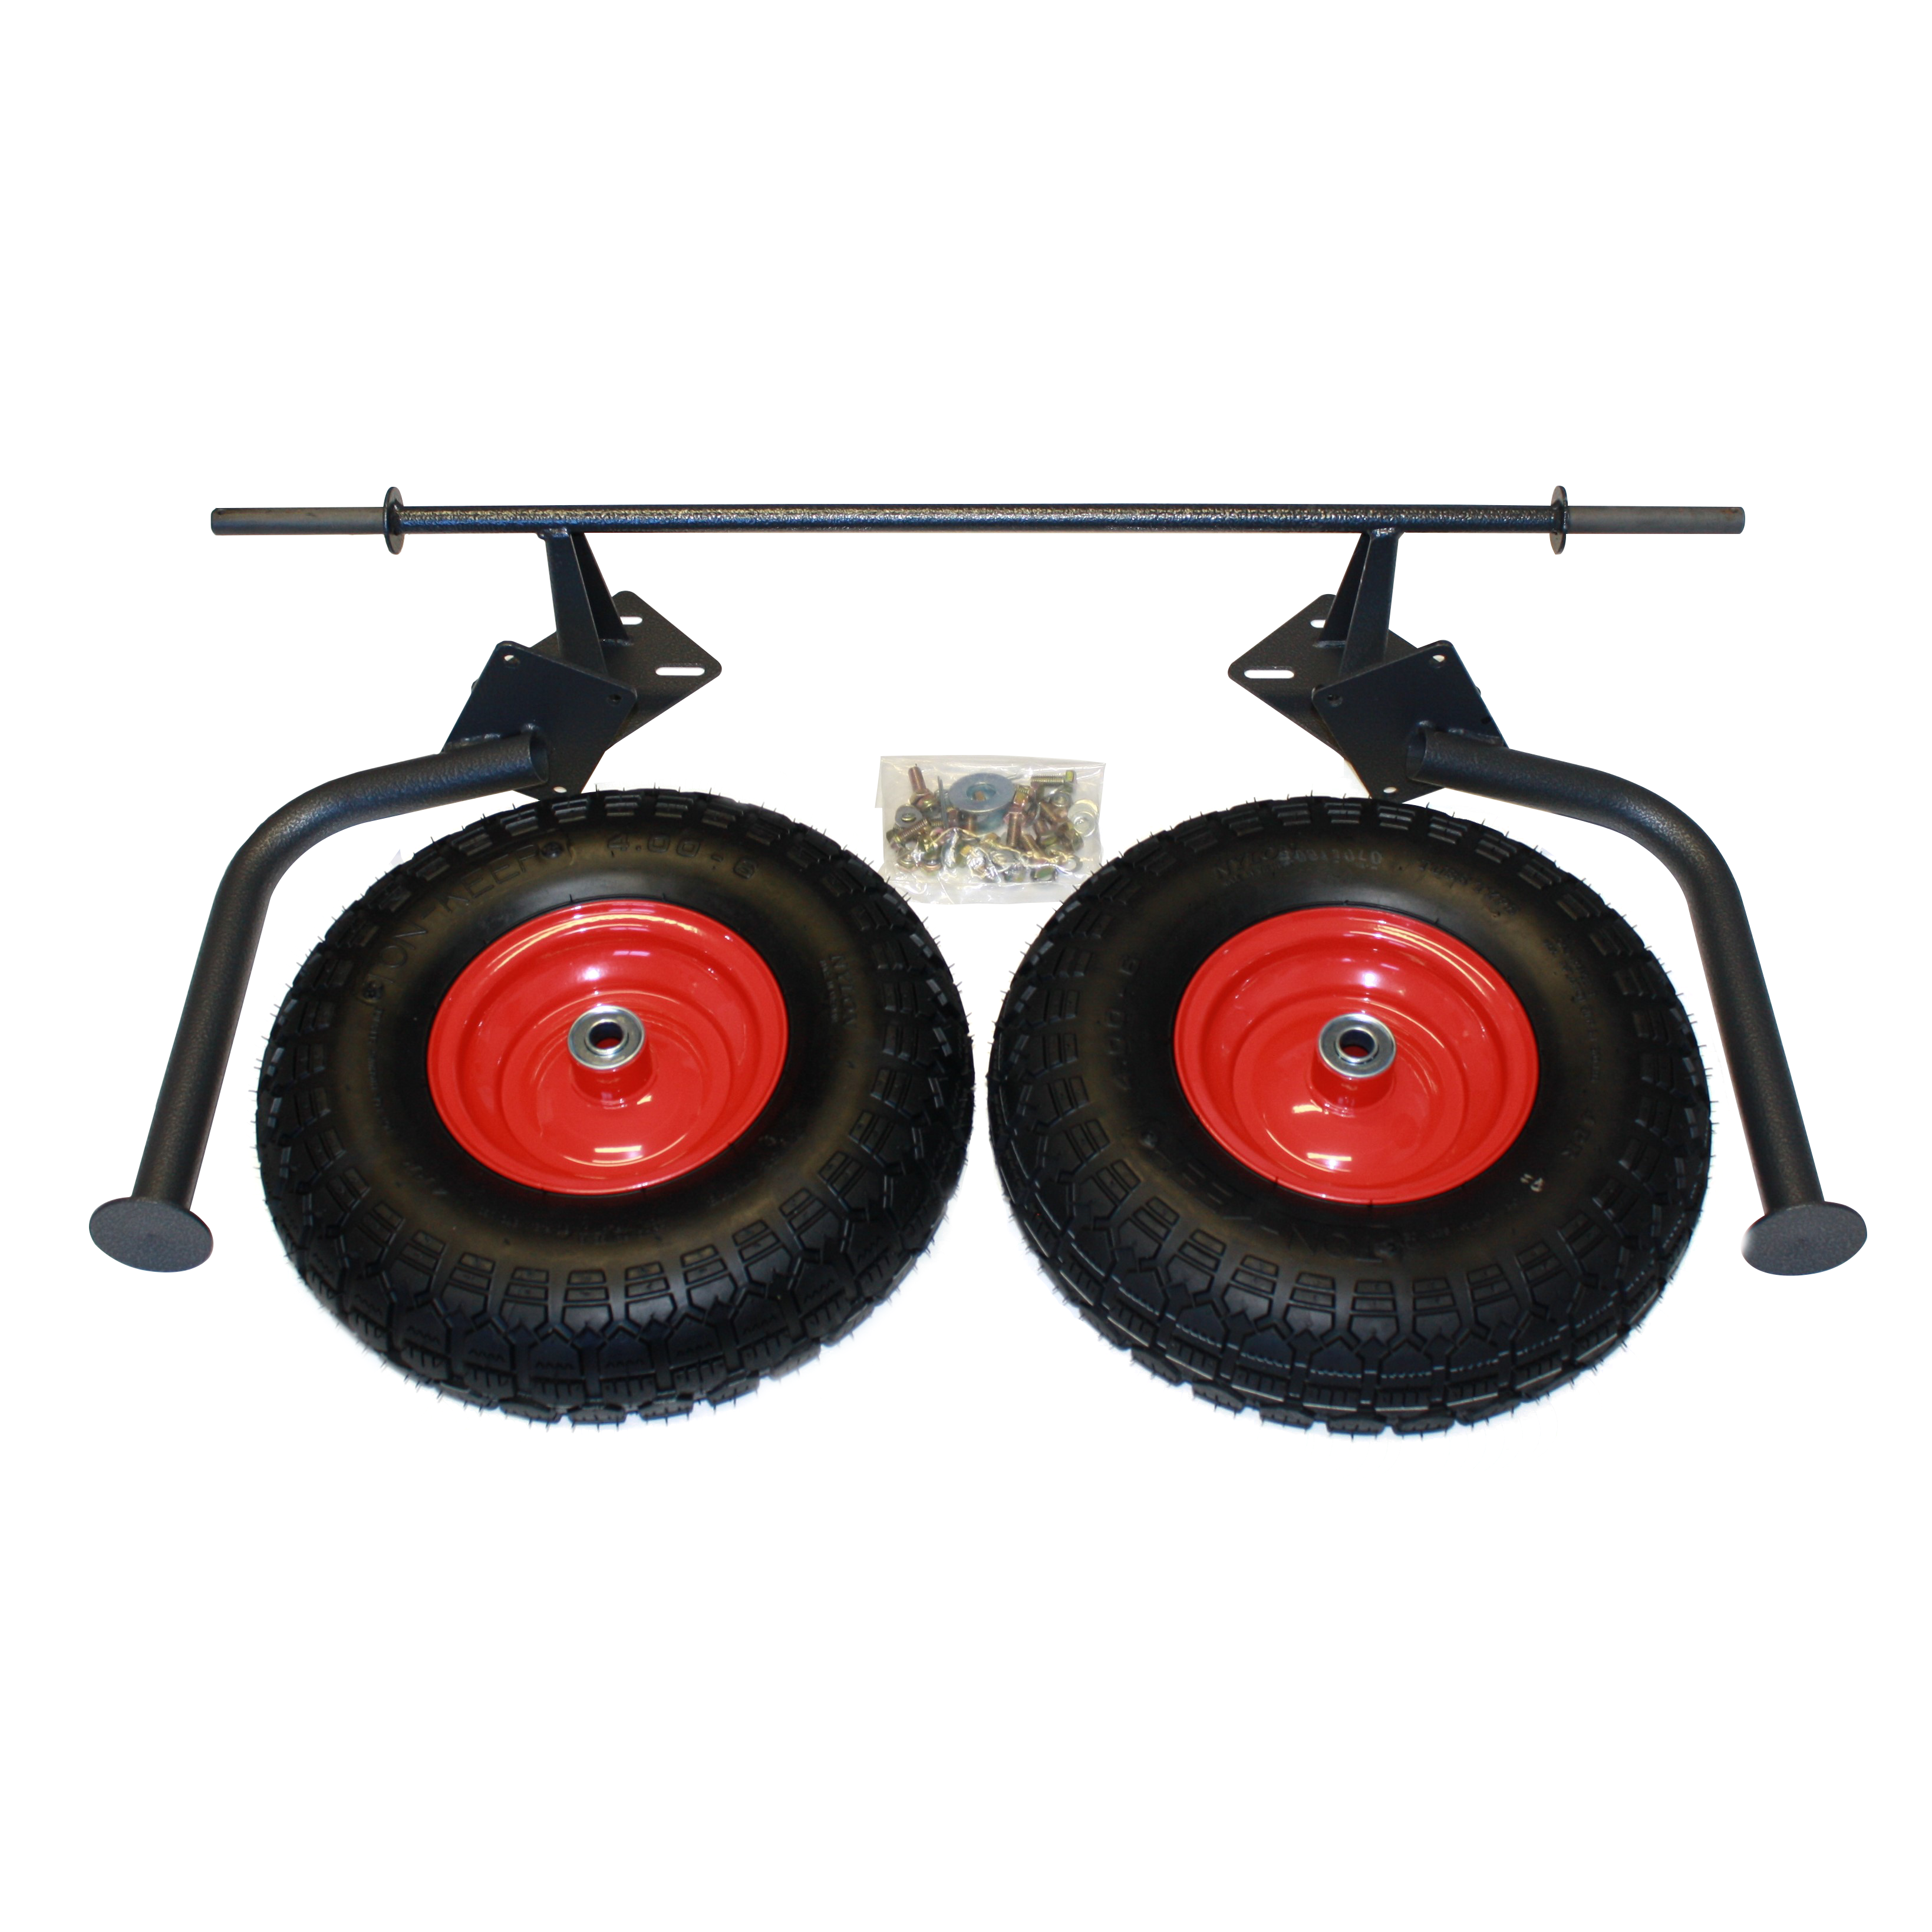 An image showcasing the X-Series Wheel Kit upgrade, designed for the Mega Hippo. Displayed against a clean white background are two large red and black wheels, accompanied by various installation parts including screws, nuts, and a metal bracket. These components are specifically tailored to enhance the Mega Hippo's performance on rough terrains, ensuring smooth maneuverability and stability.